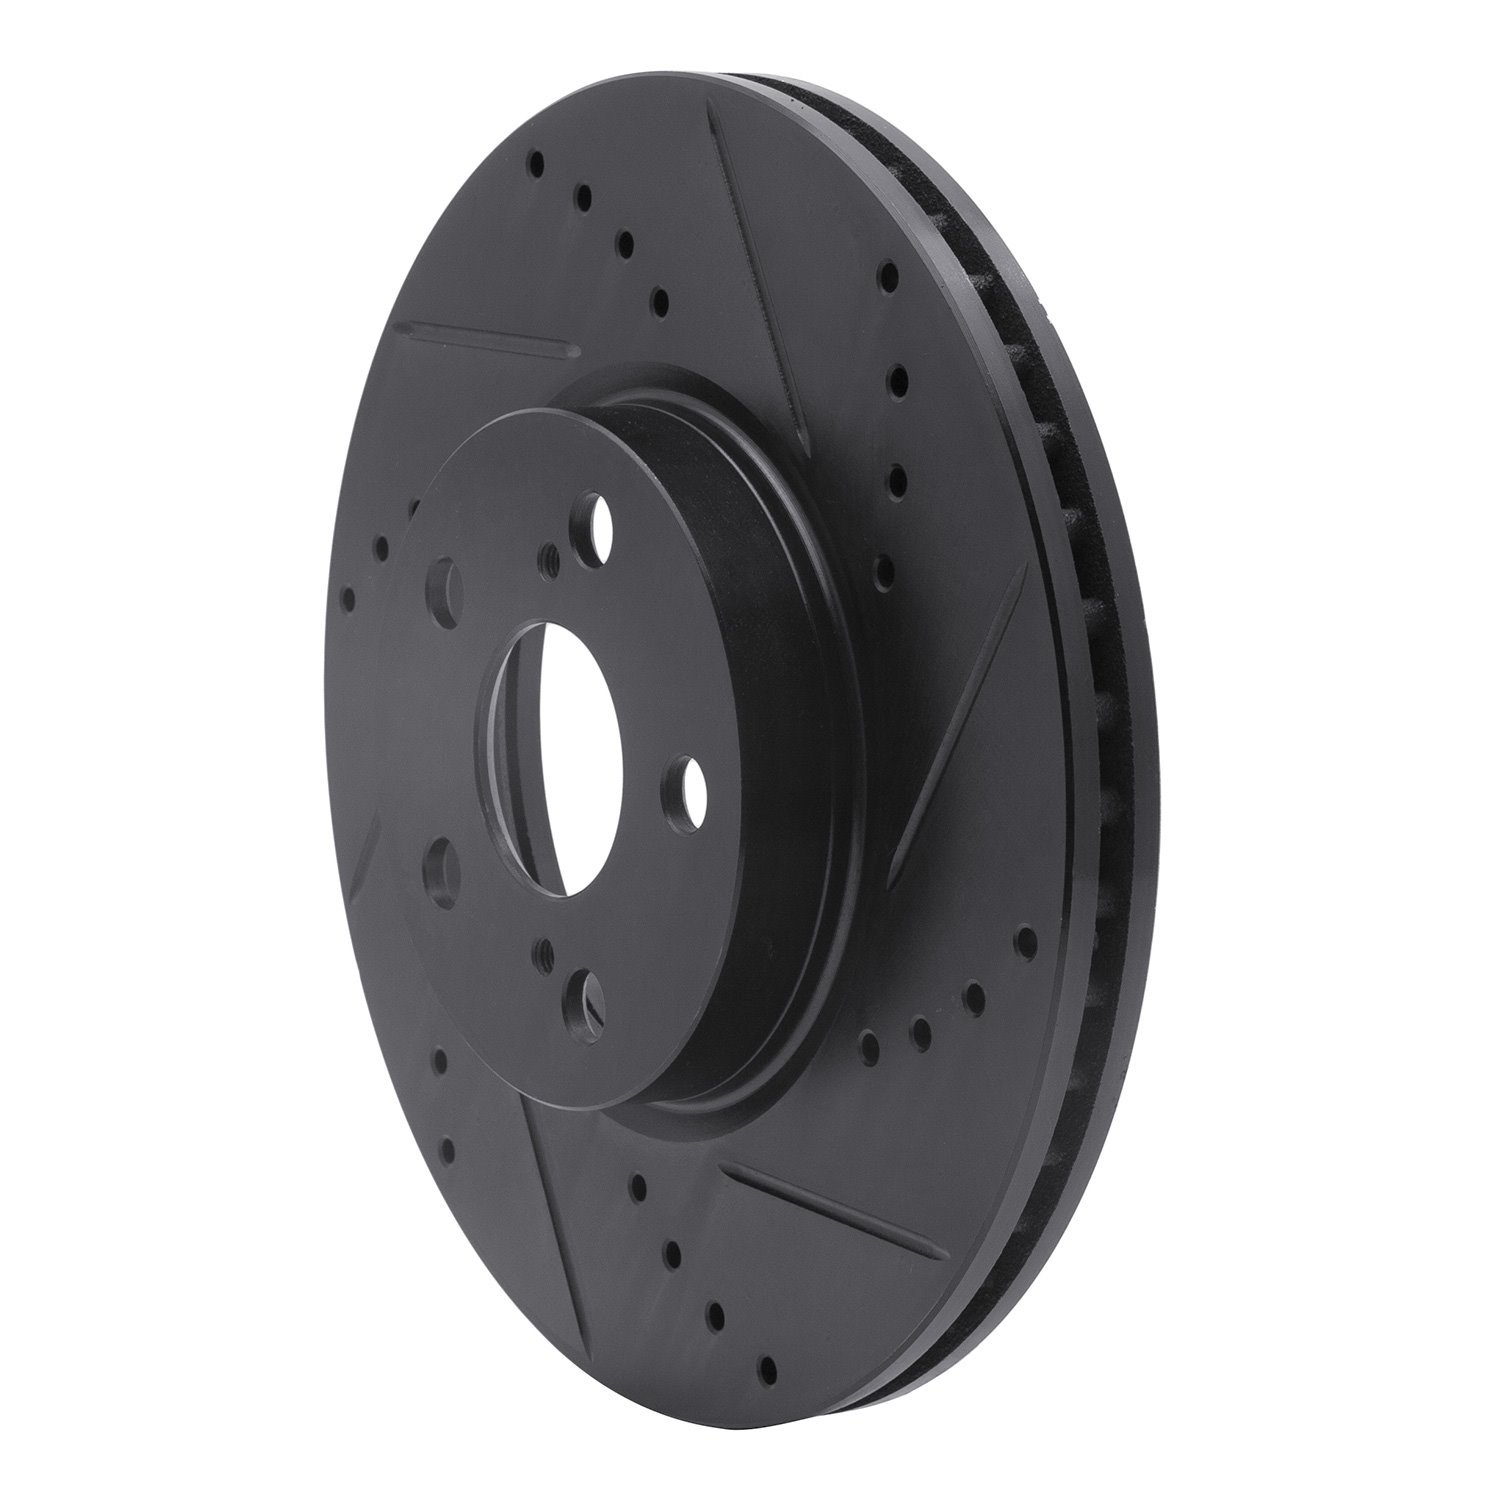 E-Line Drilled & Slotted Black Brake Rotor, 2008-2019 Fits Multiple Makes/Models, Position: Front Right